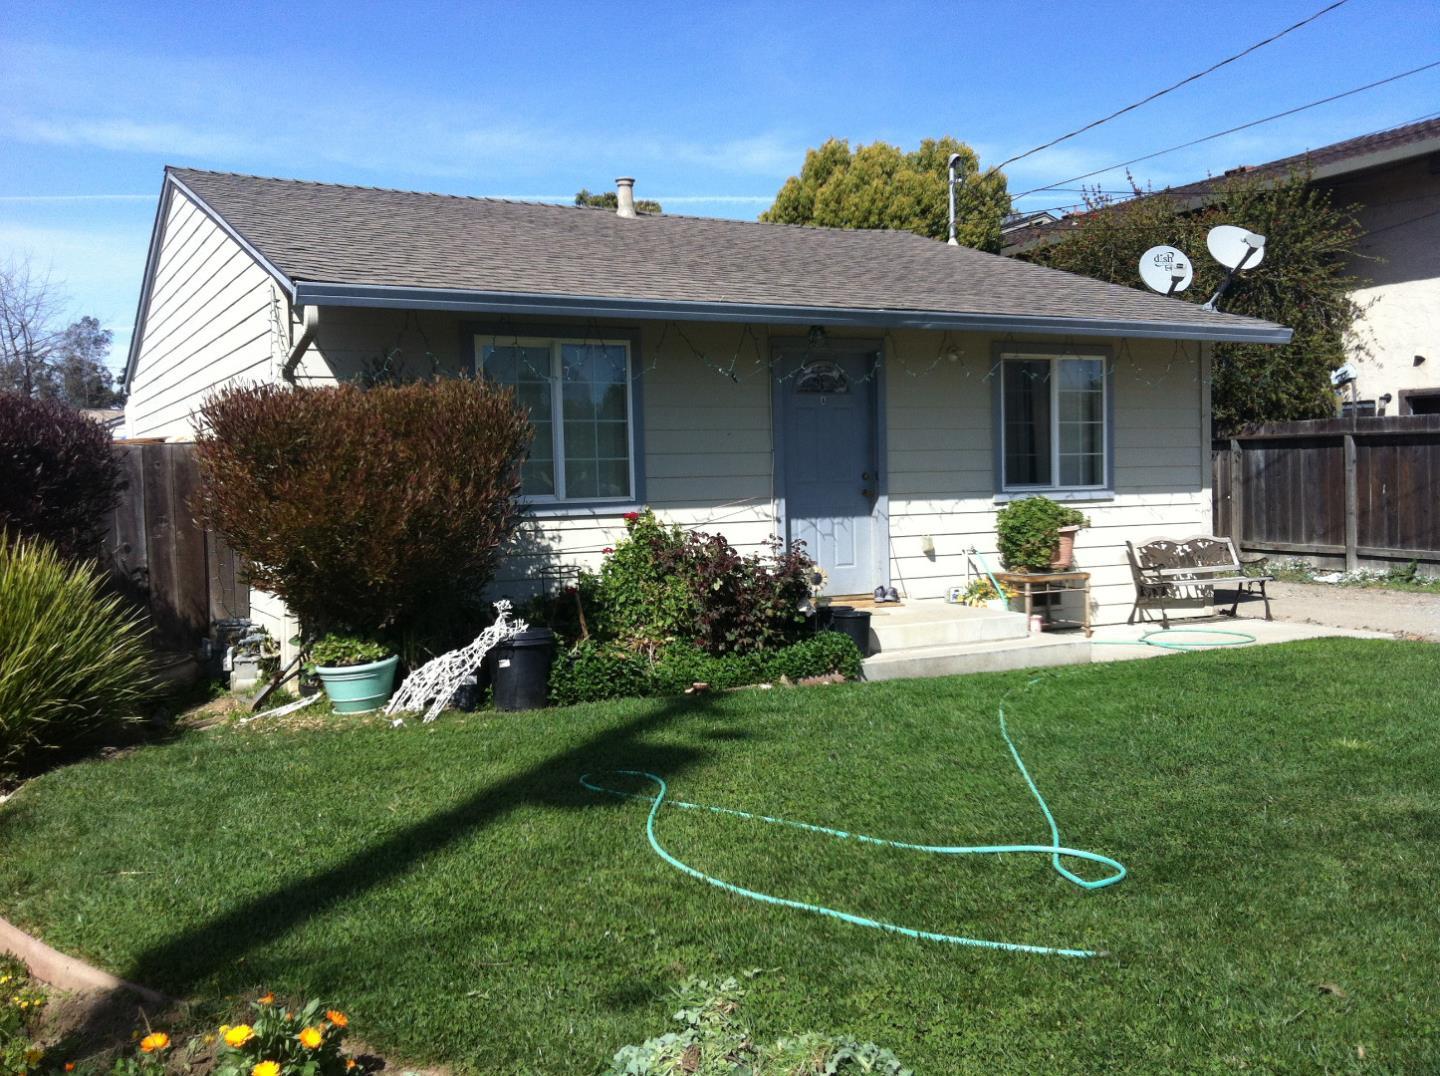 Photo of 55 Wright Ave in Morgan Hill, CA